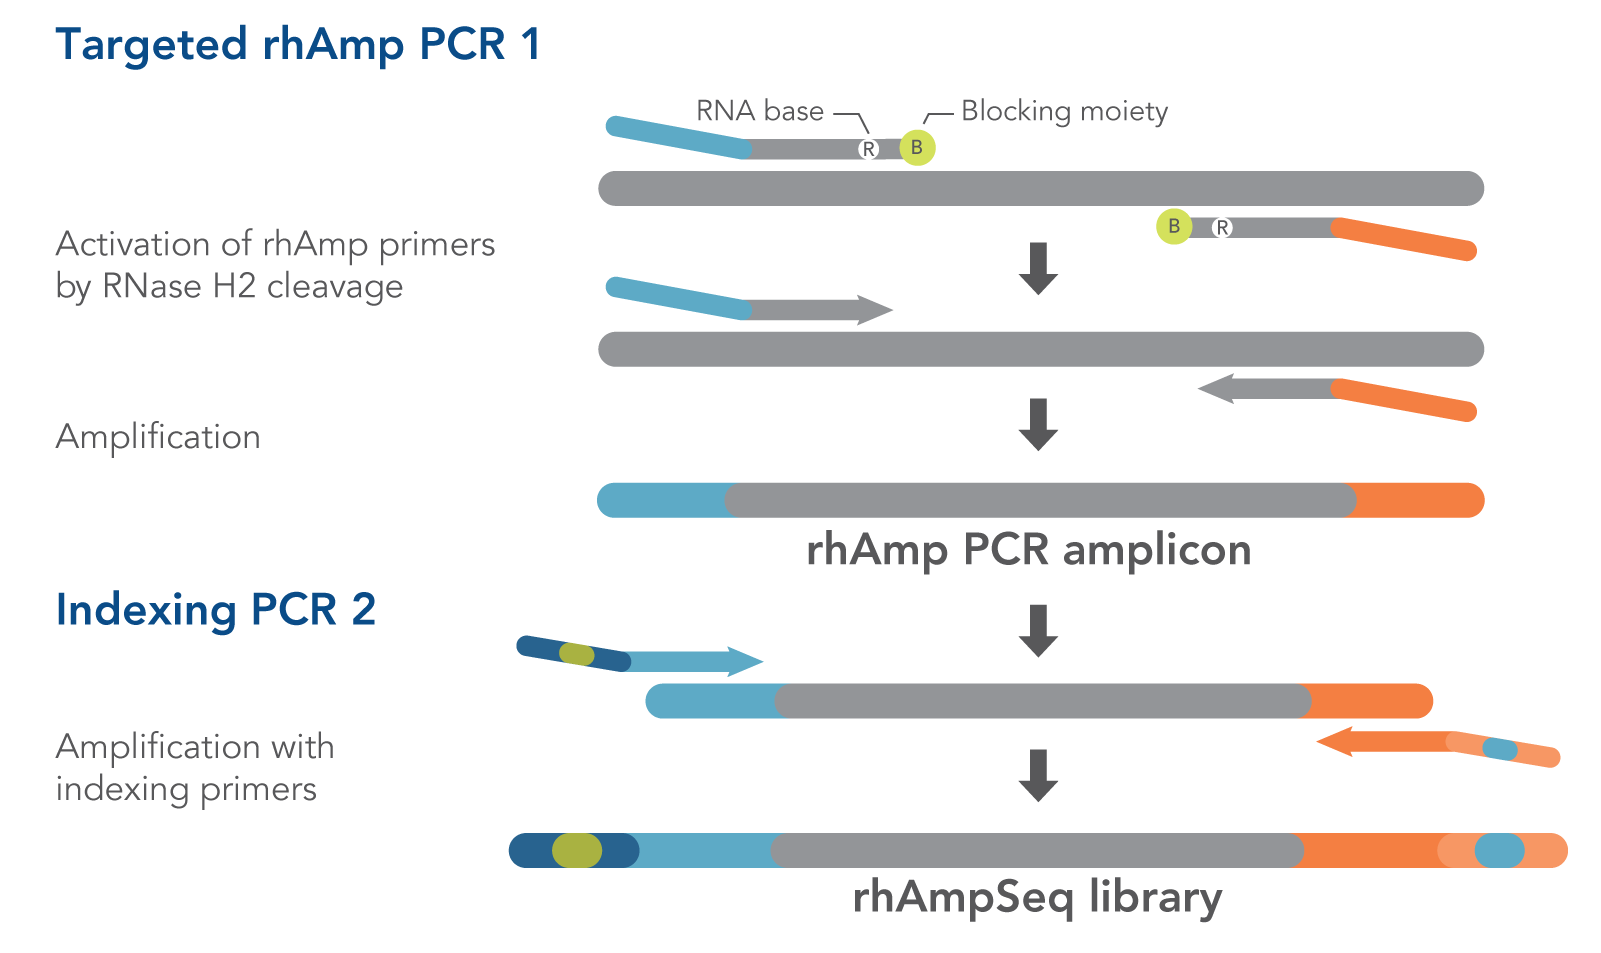 rhAmpSeq Amplicon Sequencing System Standard Workflow